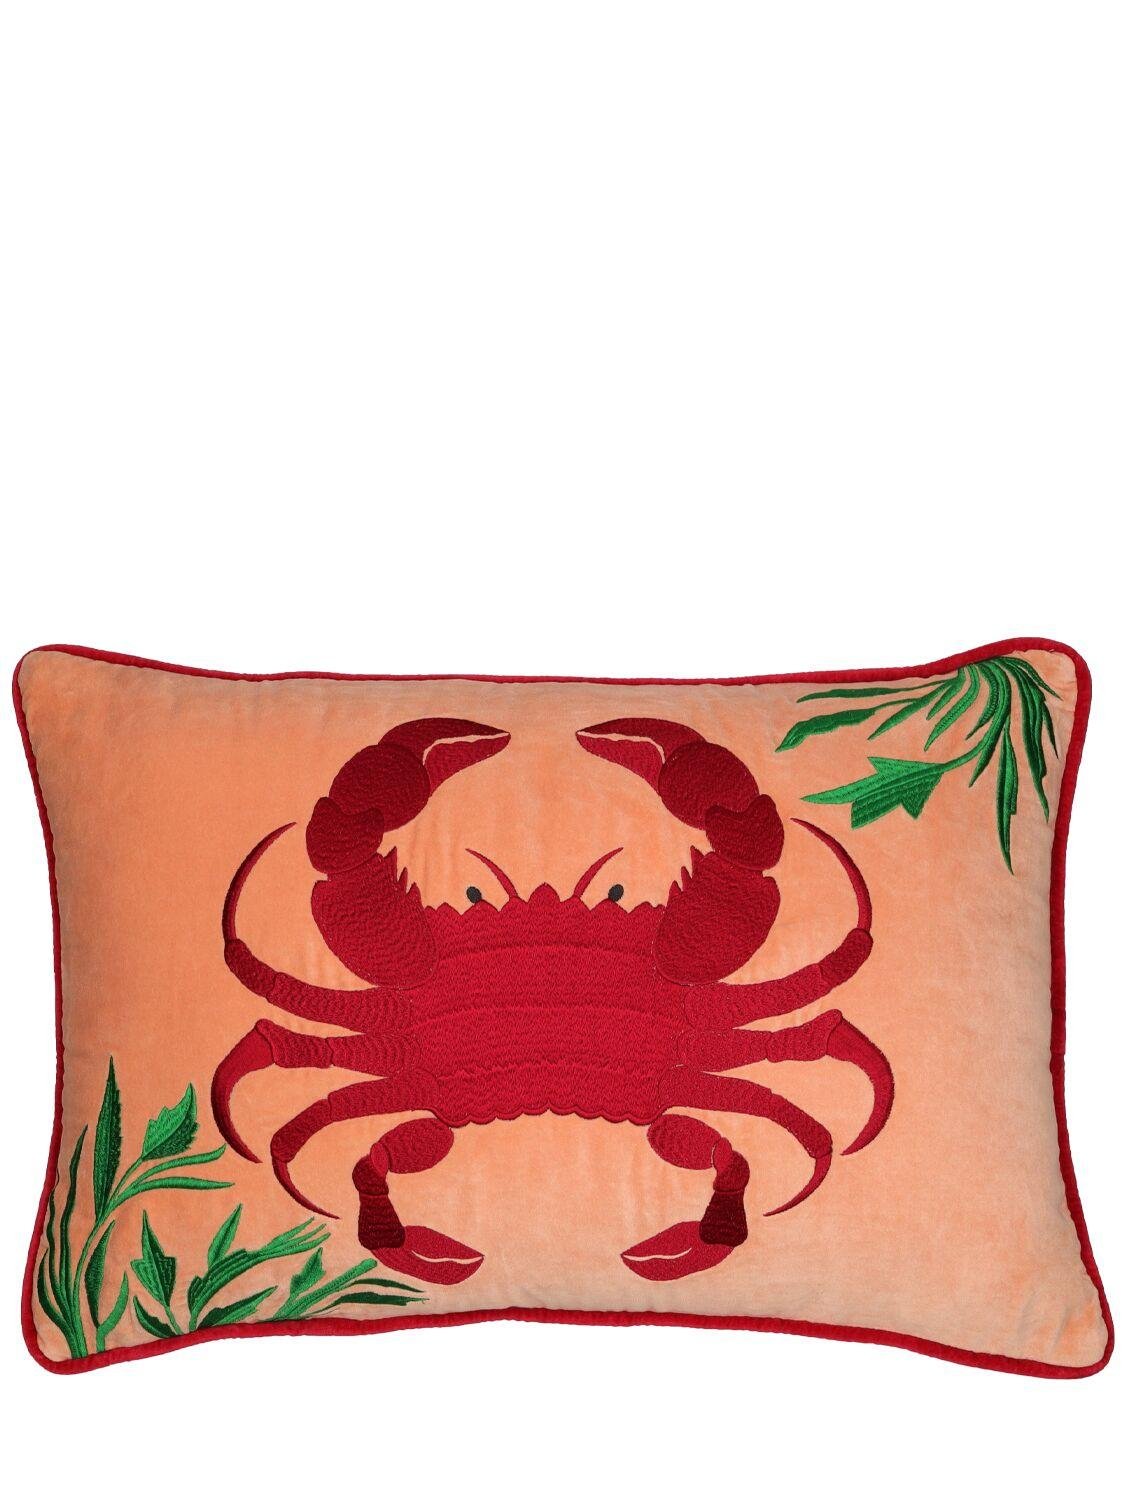 Hand-embroidered Cotton Velvet Cushion by LES OTTOMANS